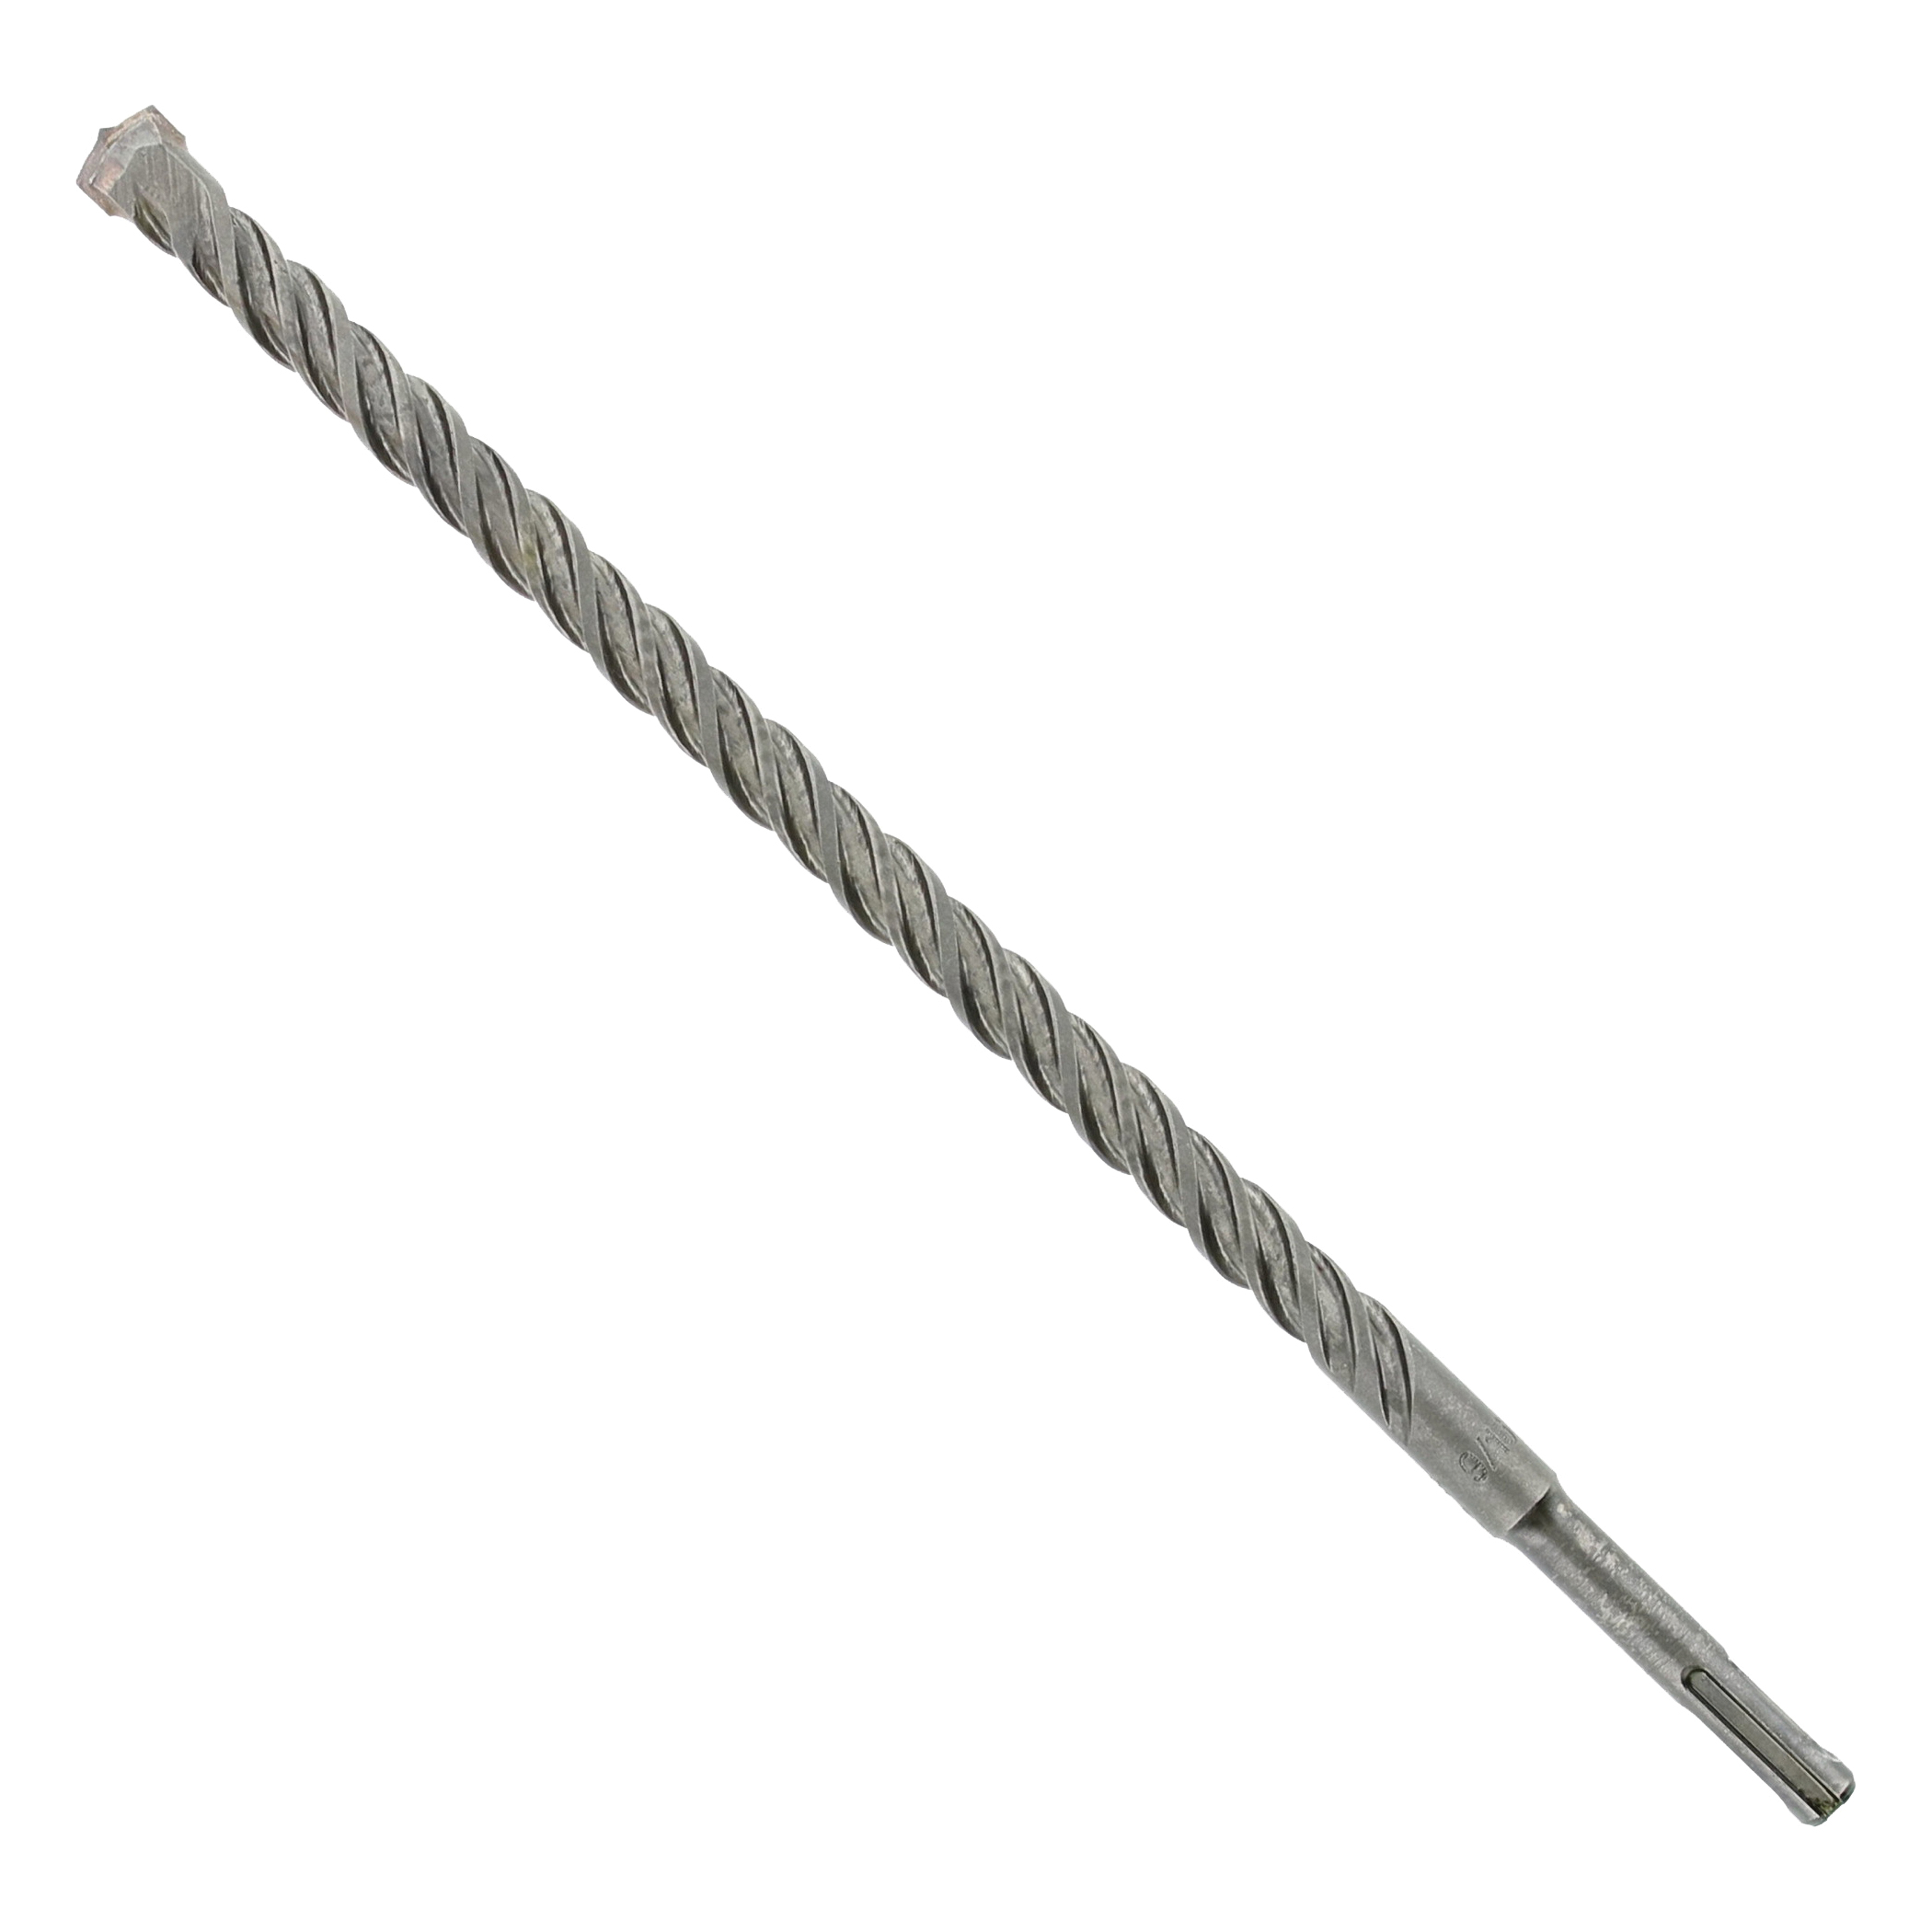 DMAPL2380 Hammer Drill Bit, 9/16 in Dia, 12 in OAL, Percussion, 4-Flute, SDS Plus Shank